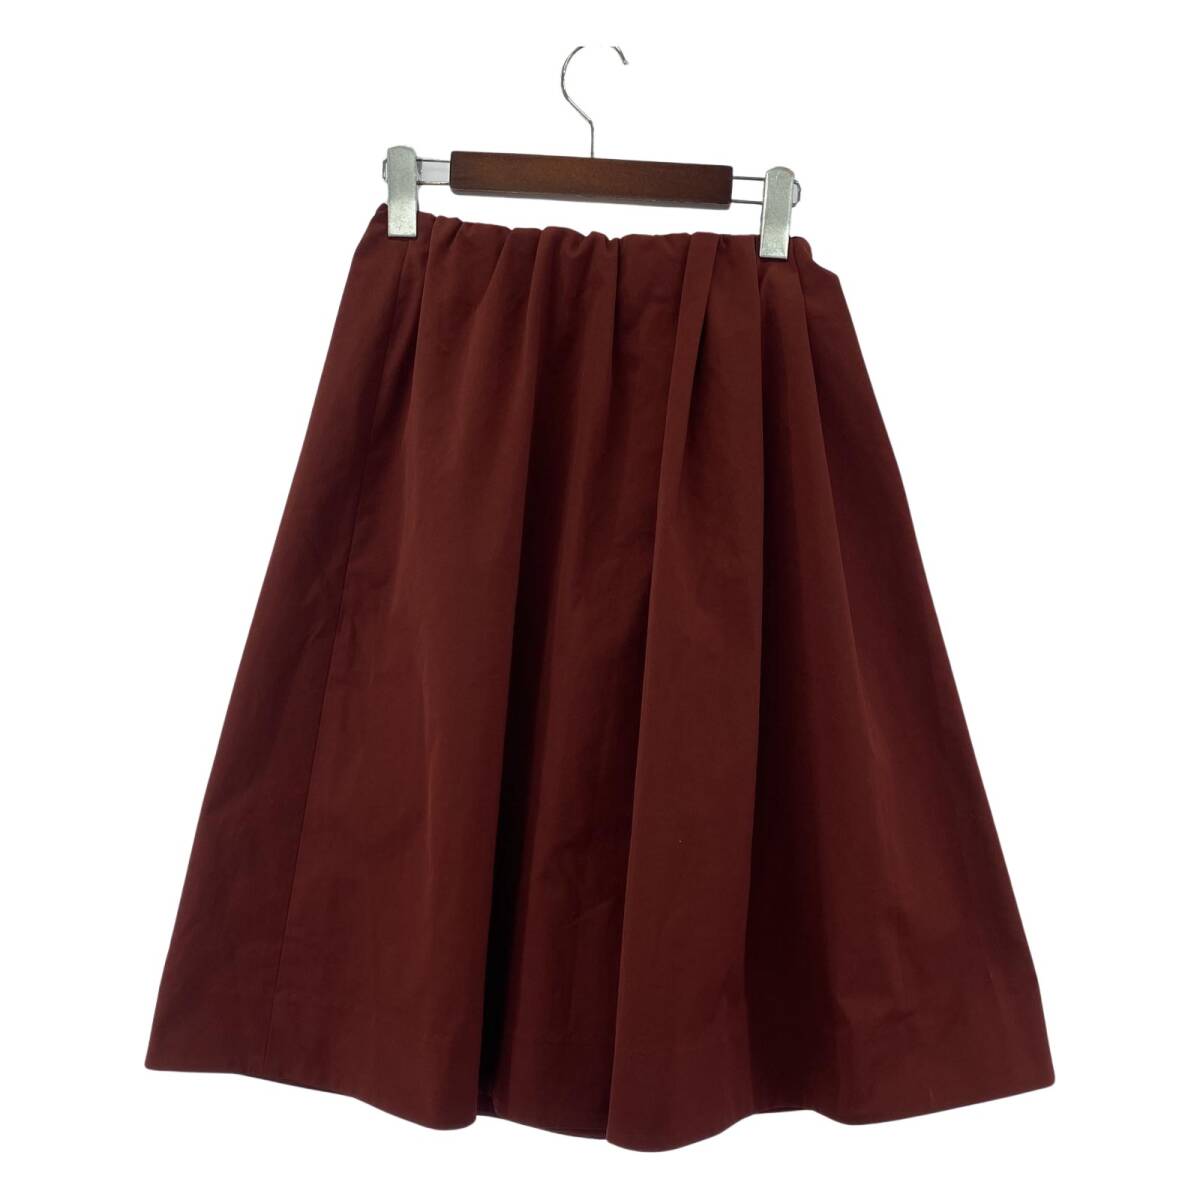 demi-luxe beamste milk s Beams tuck flair skirt size36/ red series lady's 